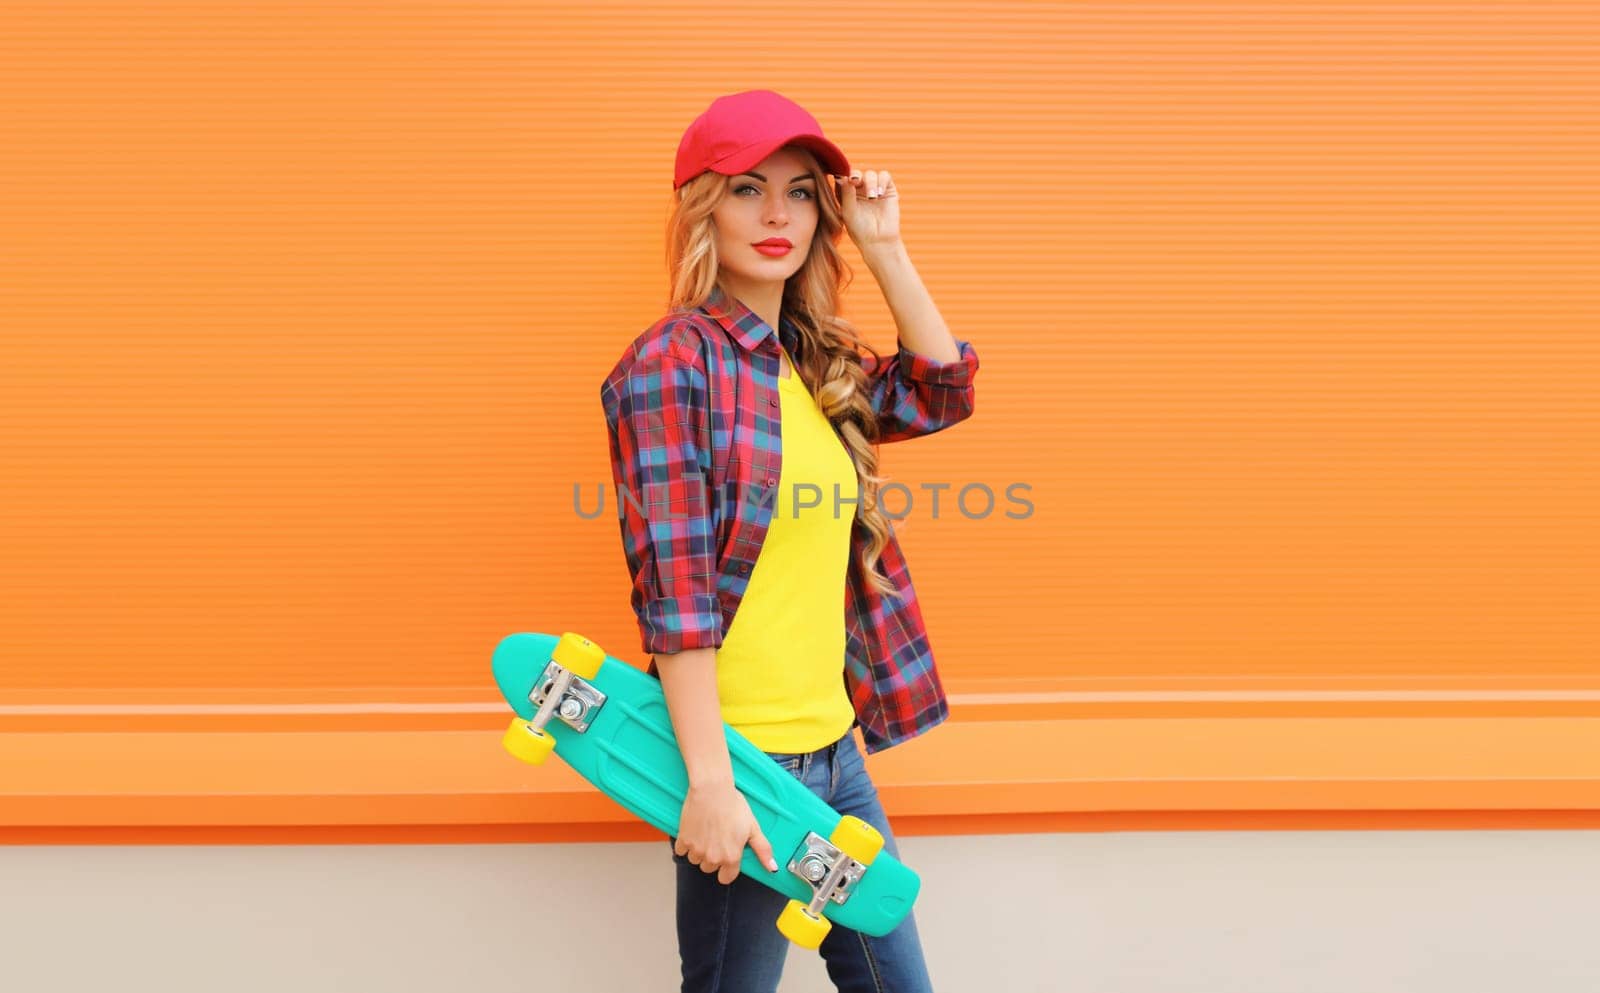 Portrait of stylish young blonde woman posing with skateboard in red baseball cap, shirt on city street against colorful orange background